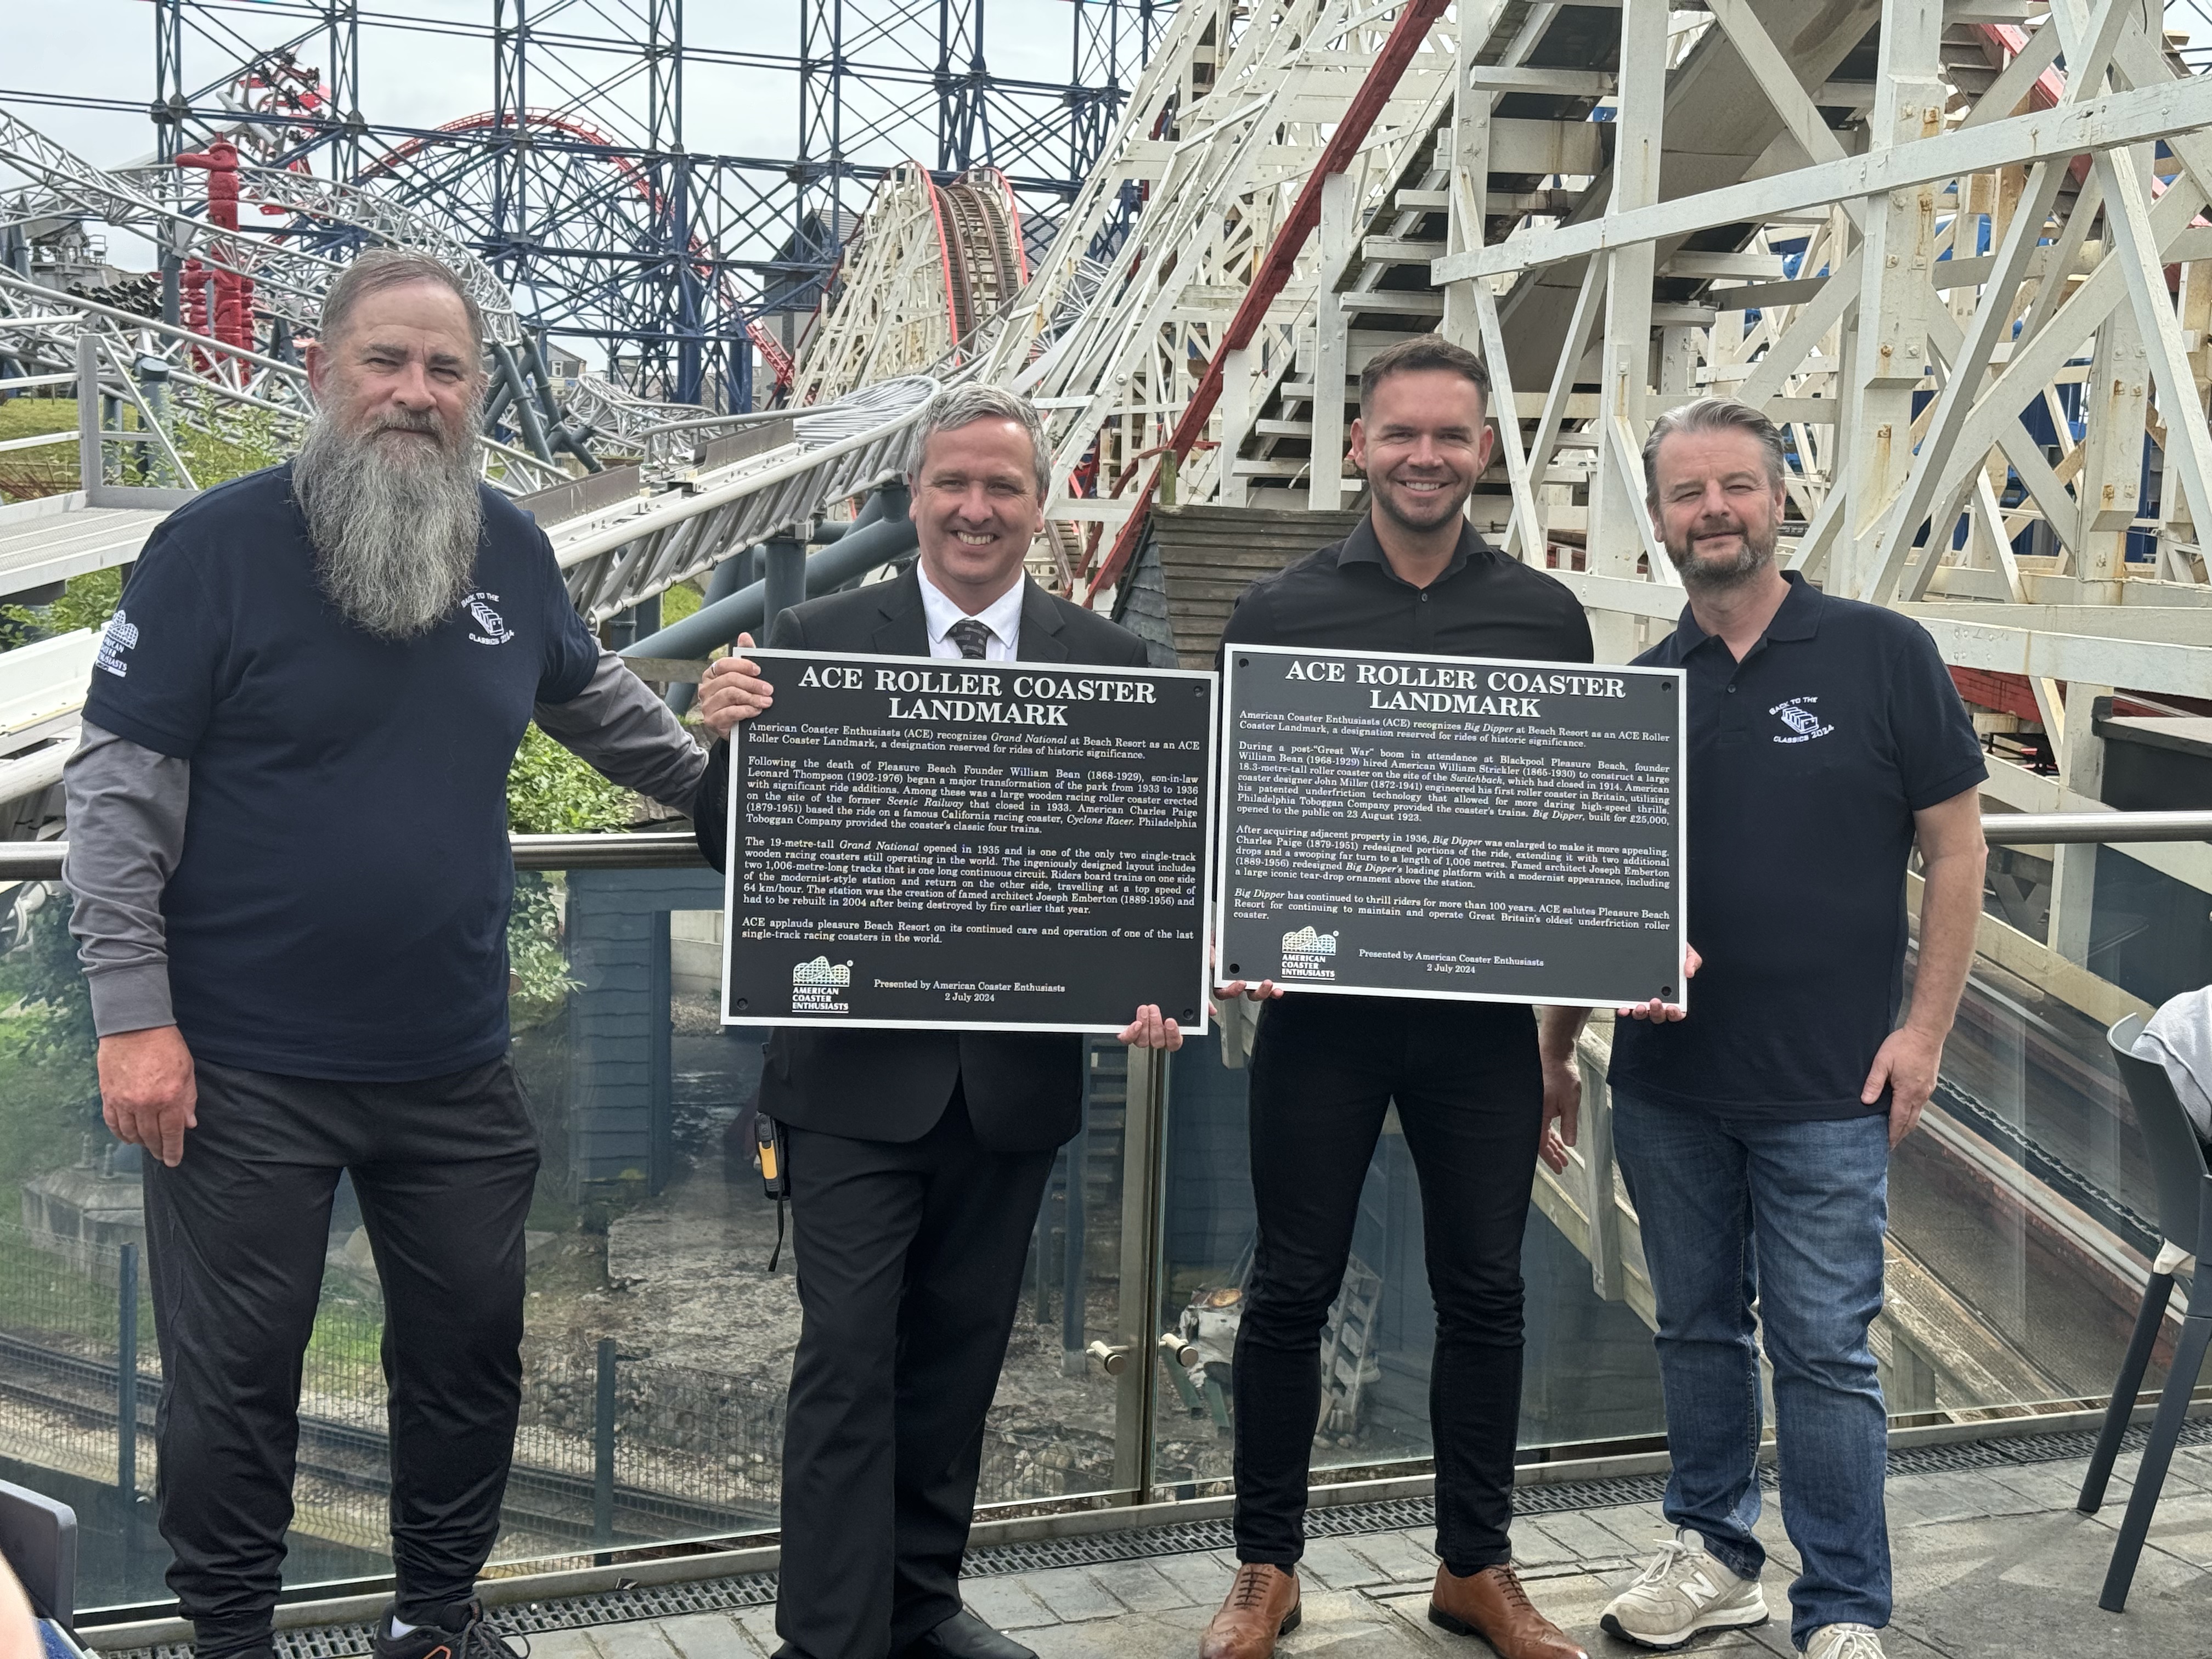 The American Coaster Enthusiasts (ACE) has awarded two rides at Blackpool's Pleasure Beach with Rollercoaster Landmark Plaques